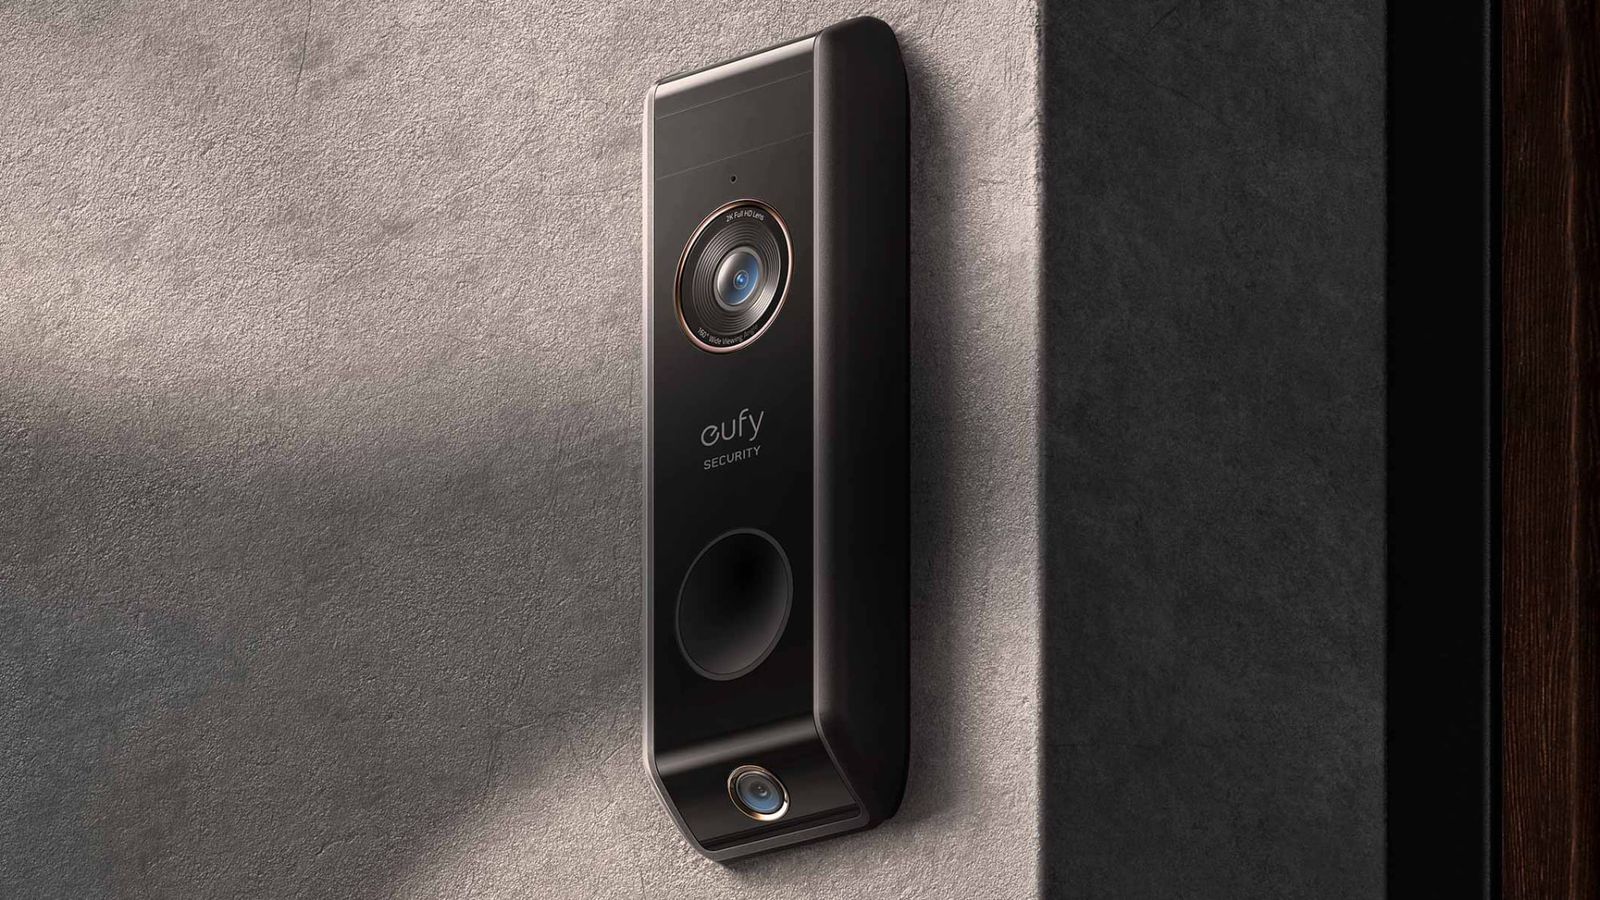 Anker's Eufy Cameras Caught Uploading Content to the Cloud Without